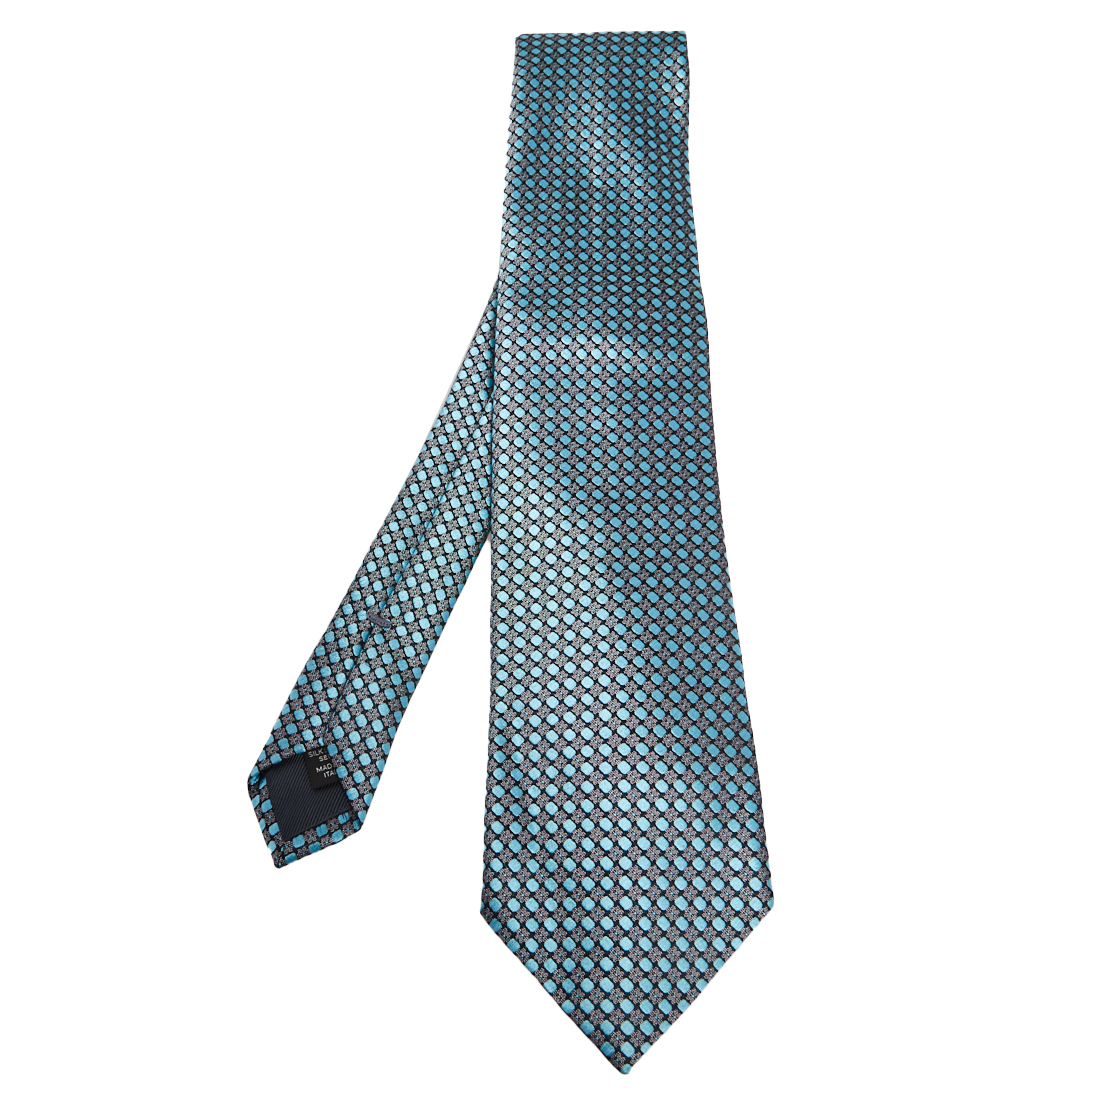 This Ermenegildo Zegna tie is a perfect formal accessory that has a sharp and modern appeal. Made from luxurious materials it features intricate patterns and the brand label neatly stitched at the back. It is sure to add oodles of style to your blazers.